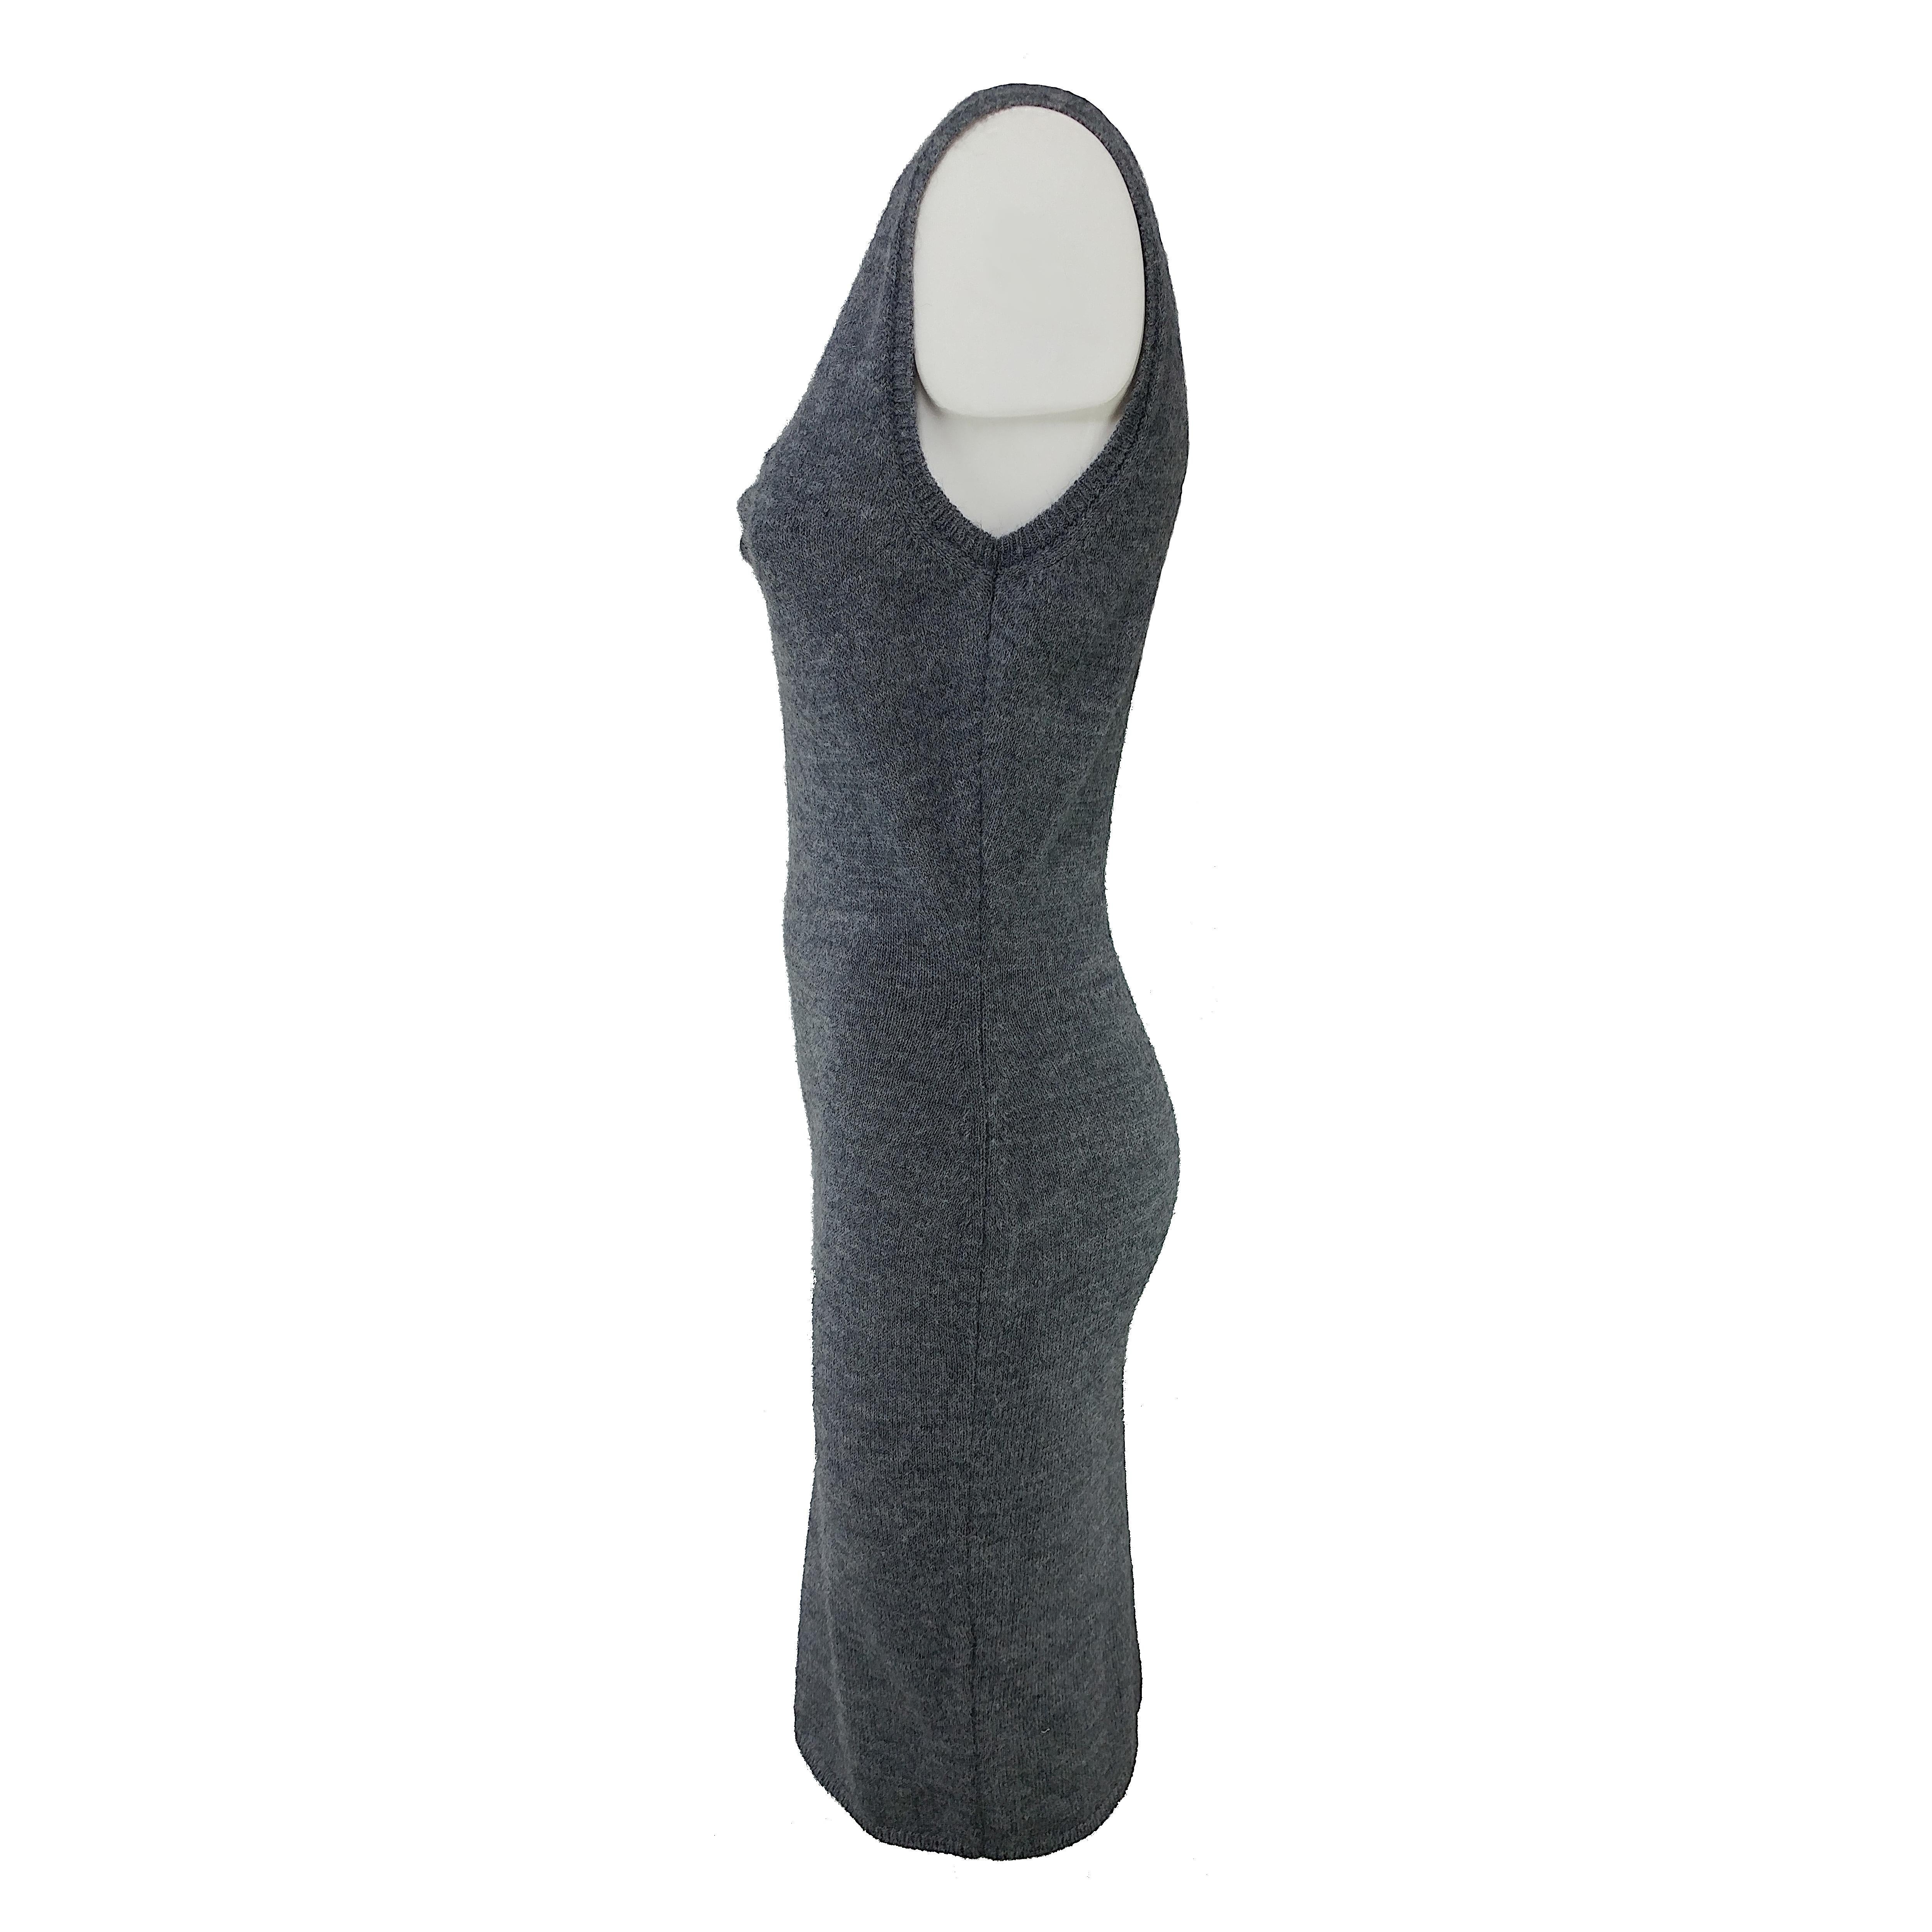 Expertly crafted from a soft blend of alpaca wool, this dark grey sleeveless knitted dress from Dolce & Gabbana will surely make a sophisticated addition to your wardrobe this season. It features a V neckline decorated with elegant foldings and it